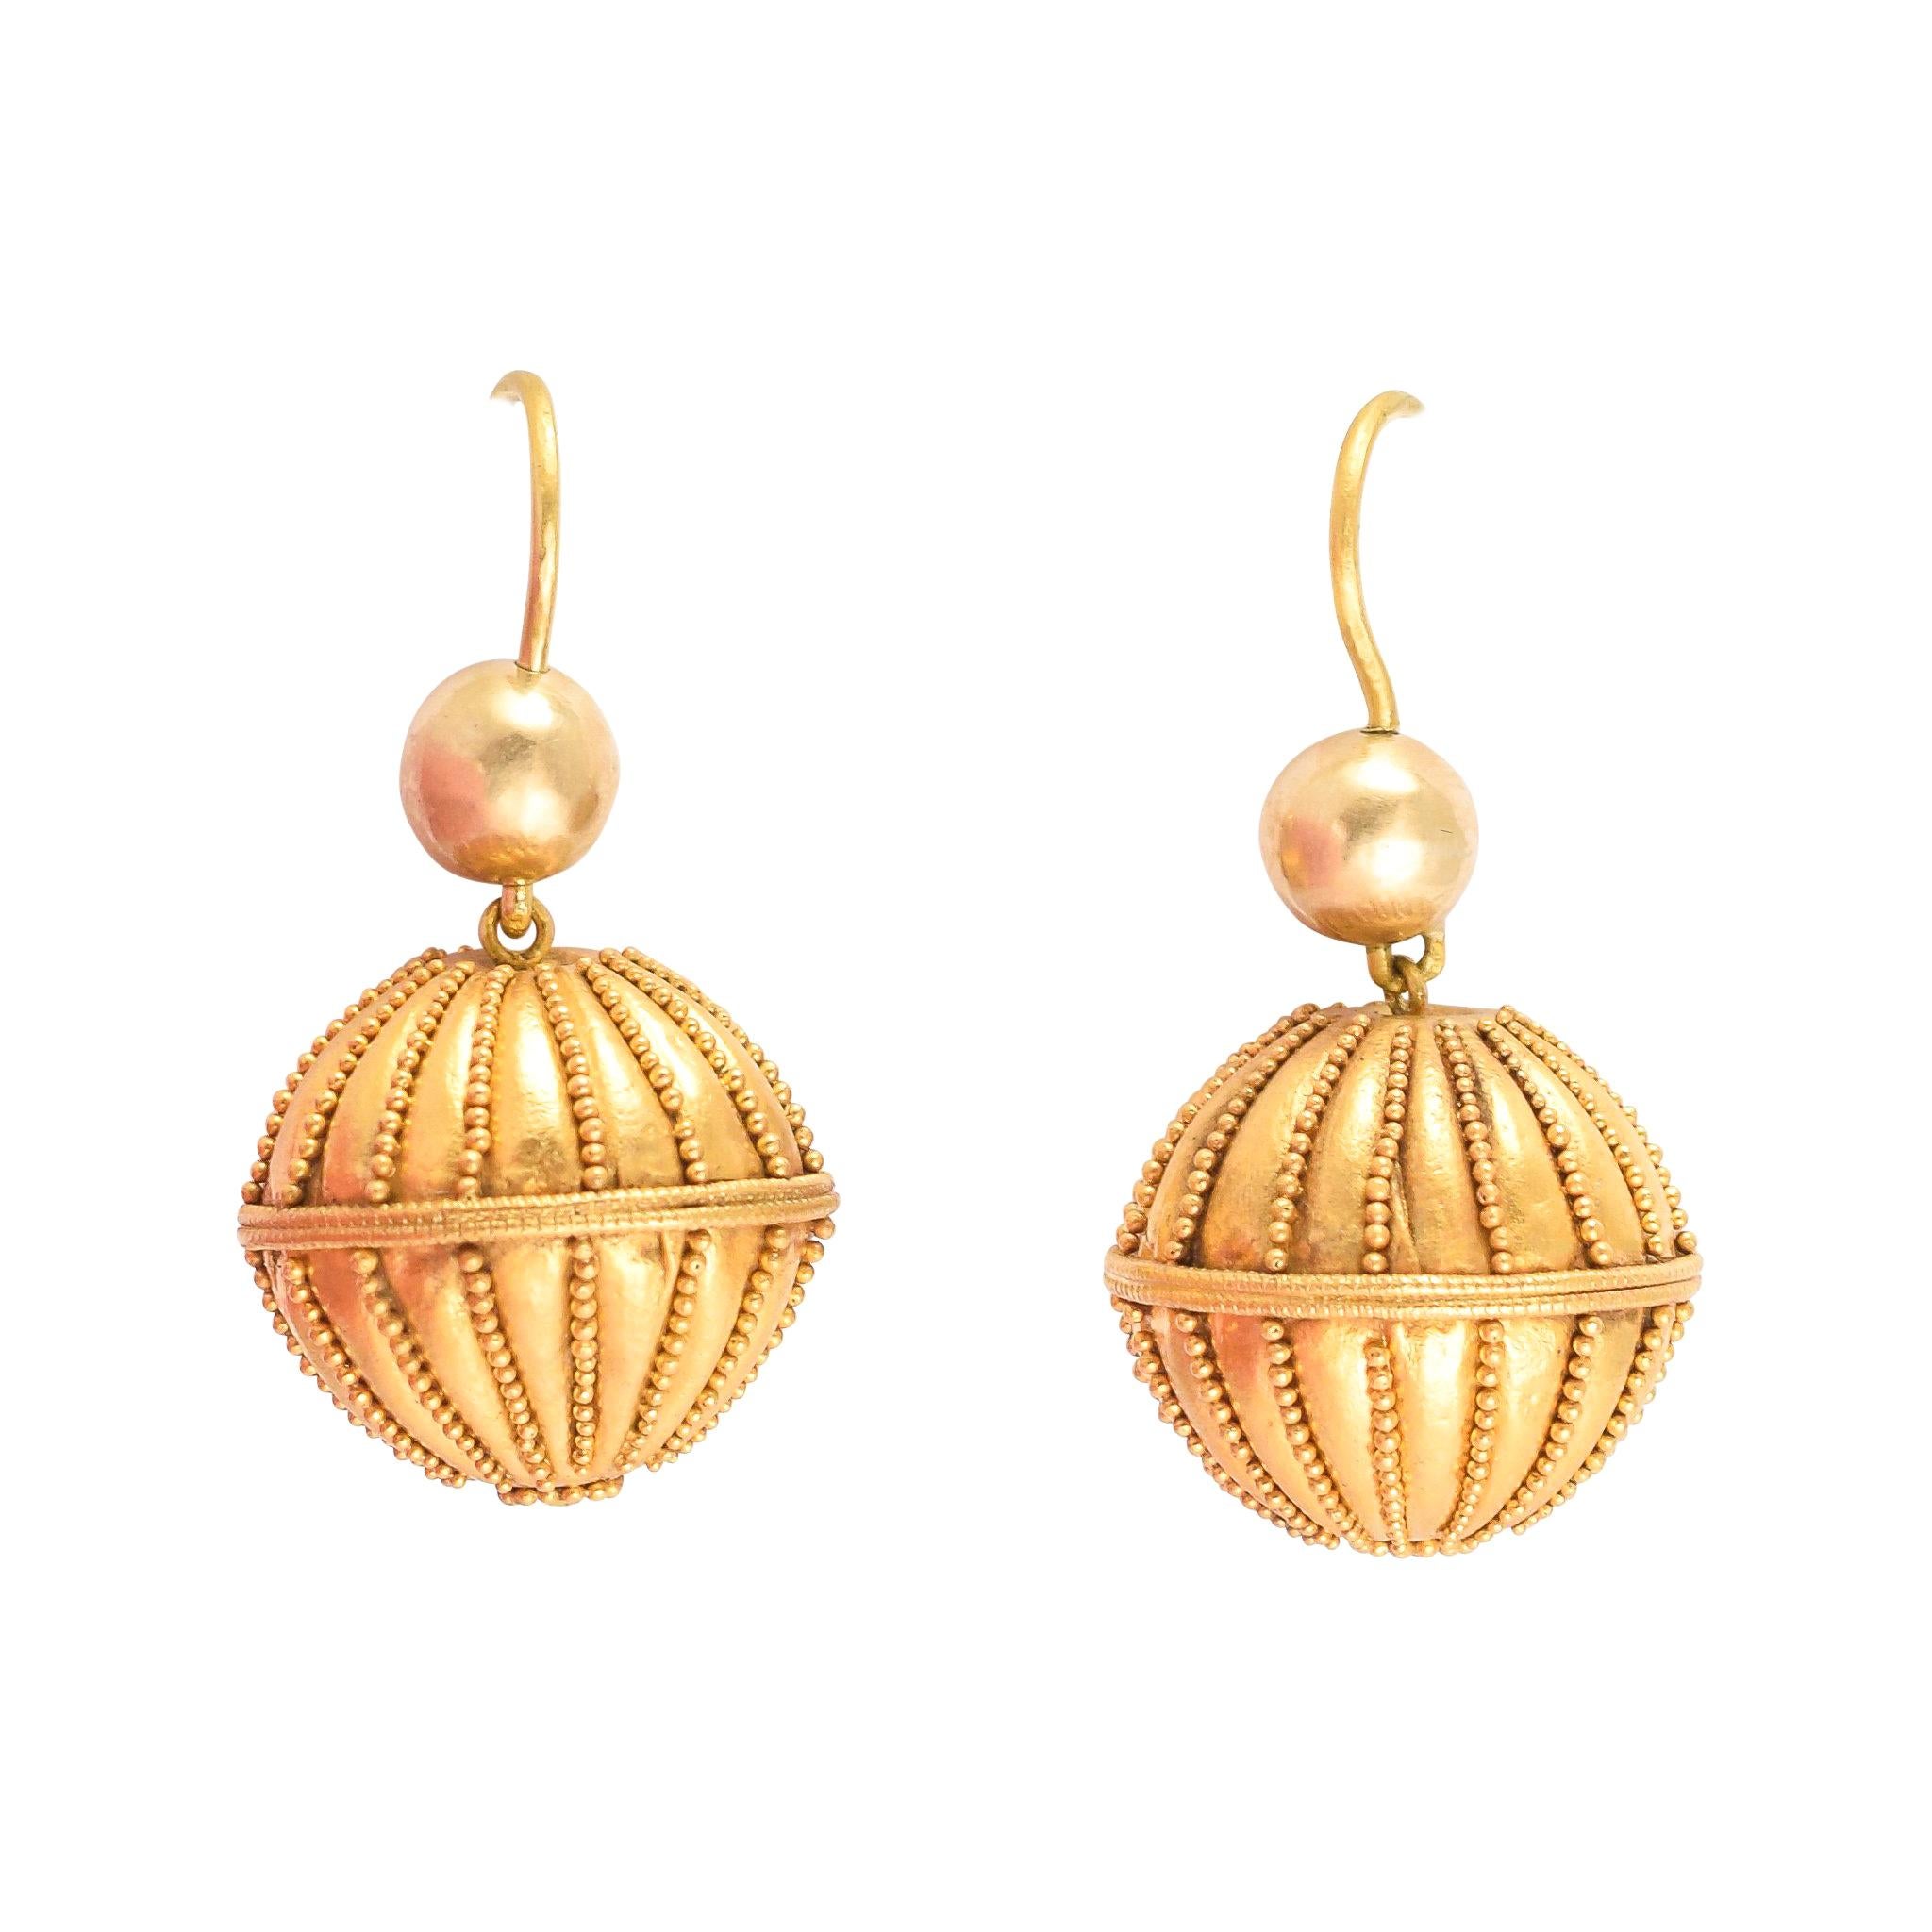 Antique Victorian Etruscan Revival Gold Orb Earrings